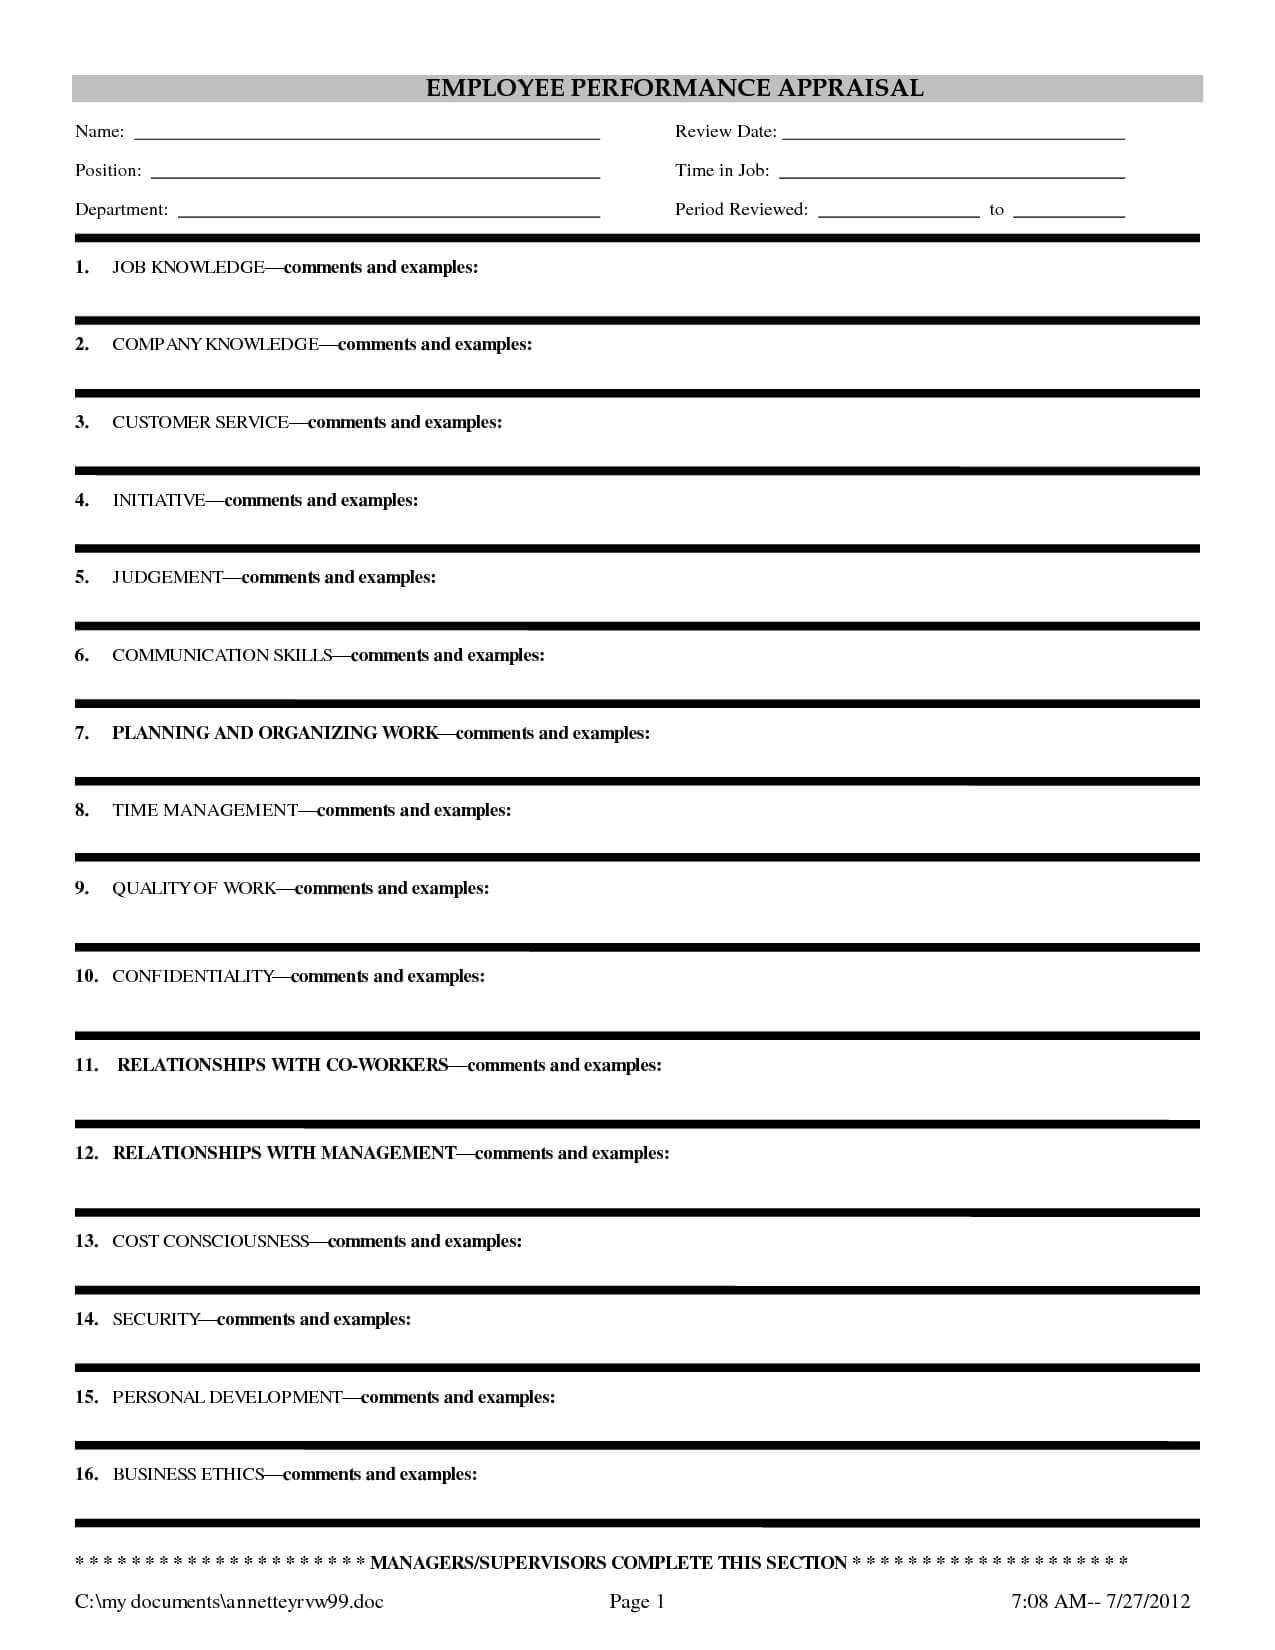 23 Images Of Evaluation Outline Template Blank | Masorler Regarding Blank Evaluation Form Template